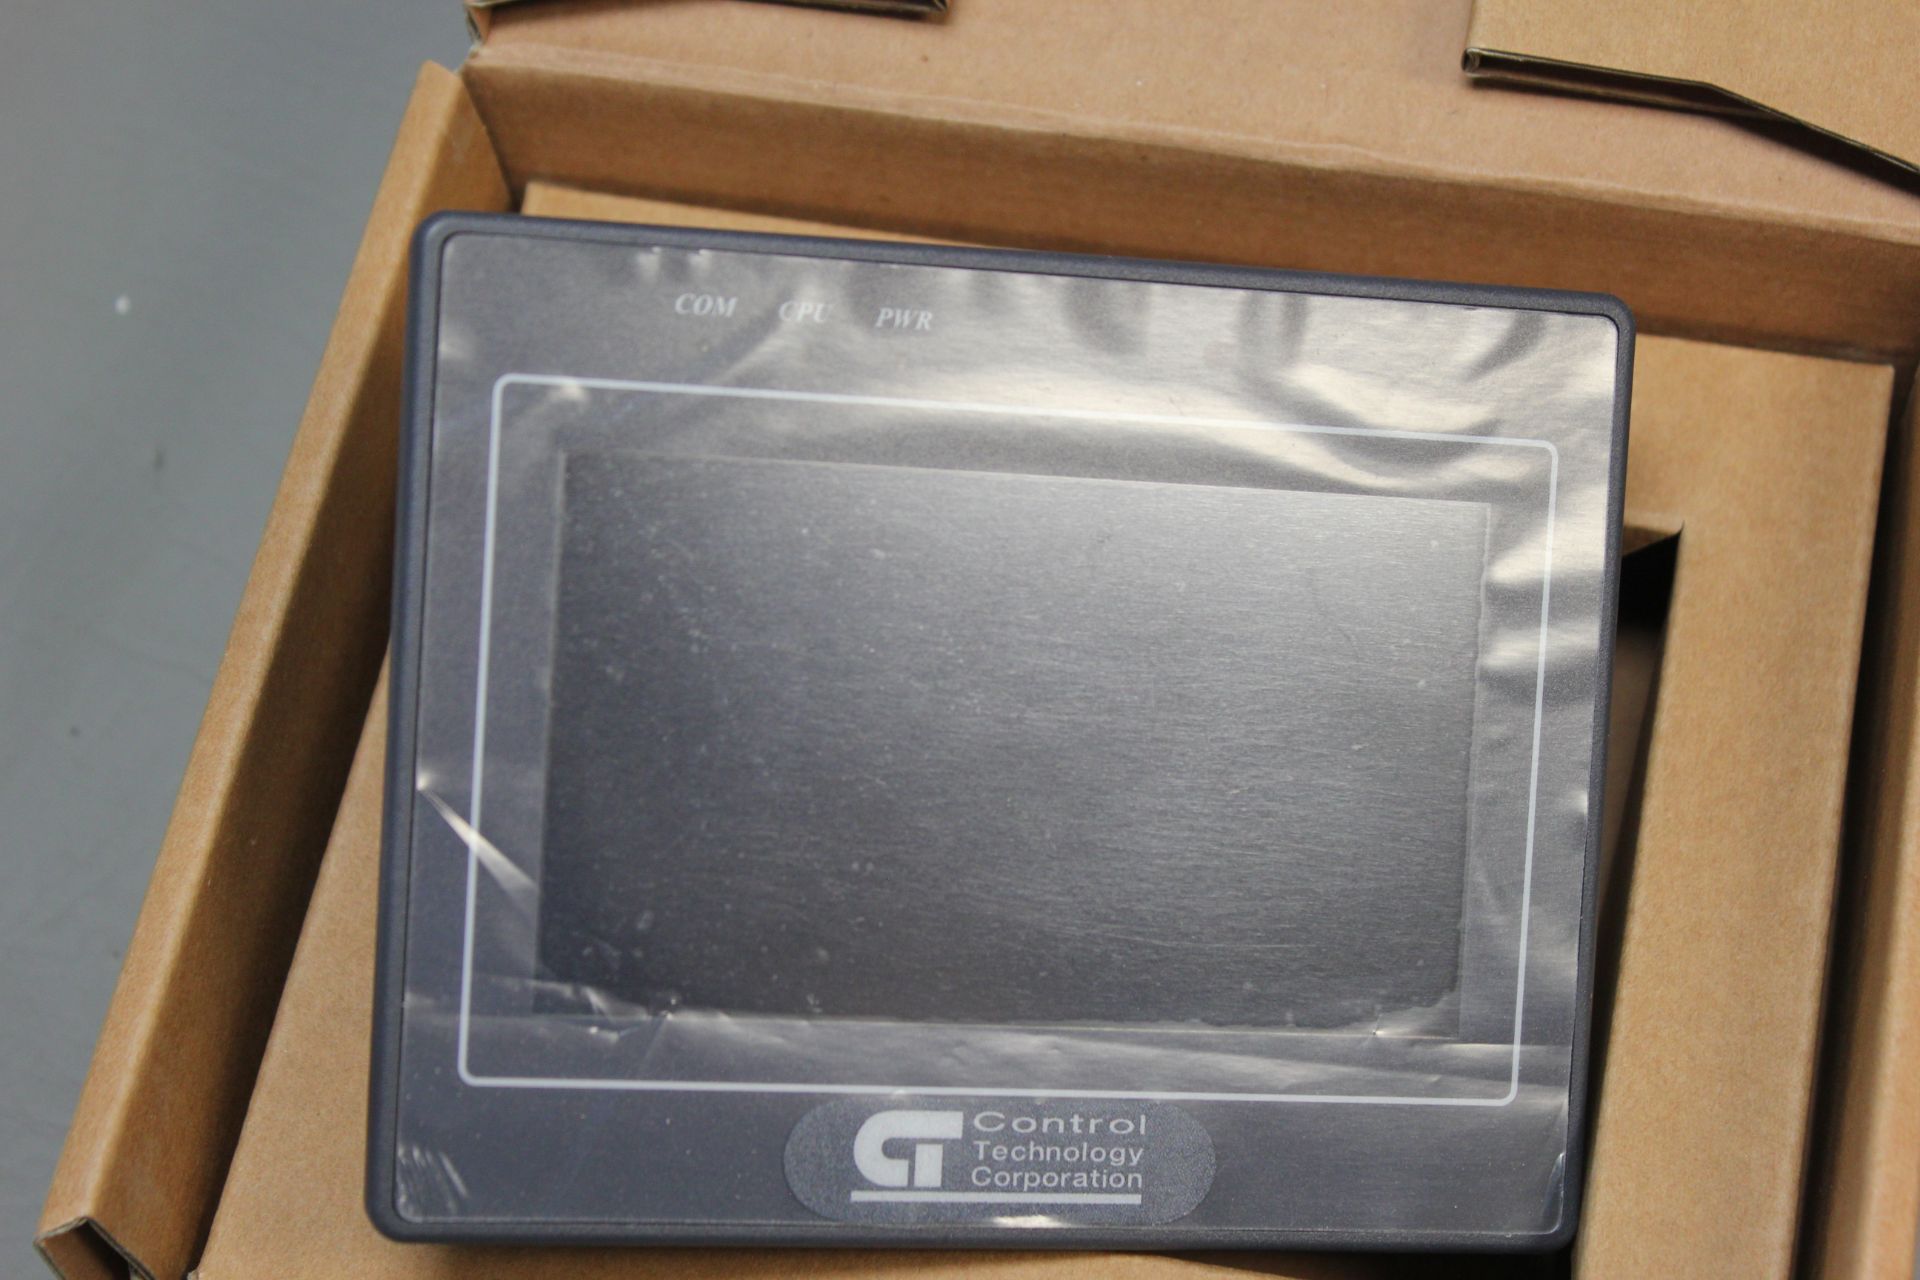 UNUSED CONTROL TECHNOLOGY HMI DISPLAY/TOUCHSCREEN - Image 6 of 6